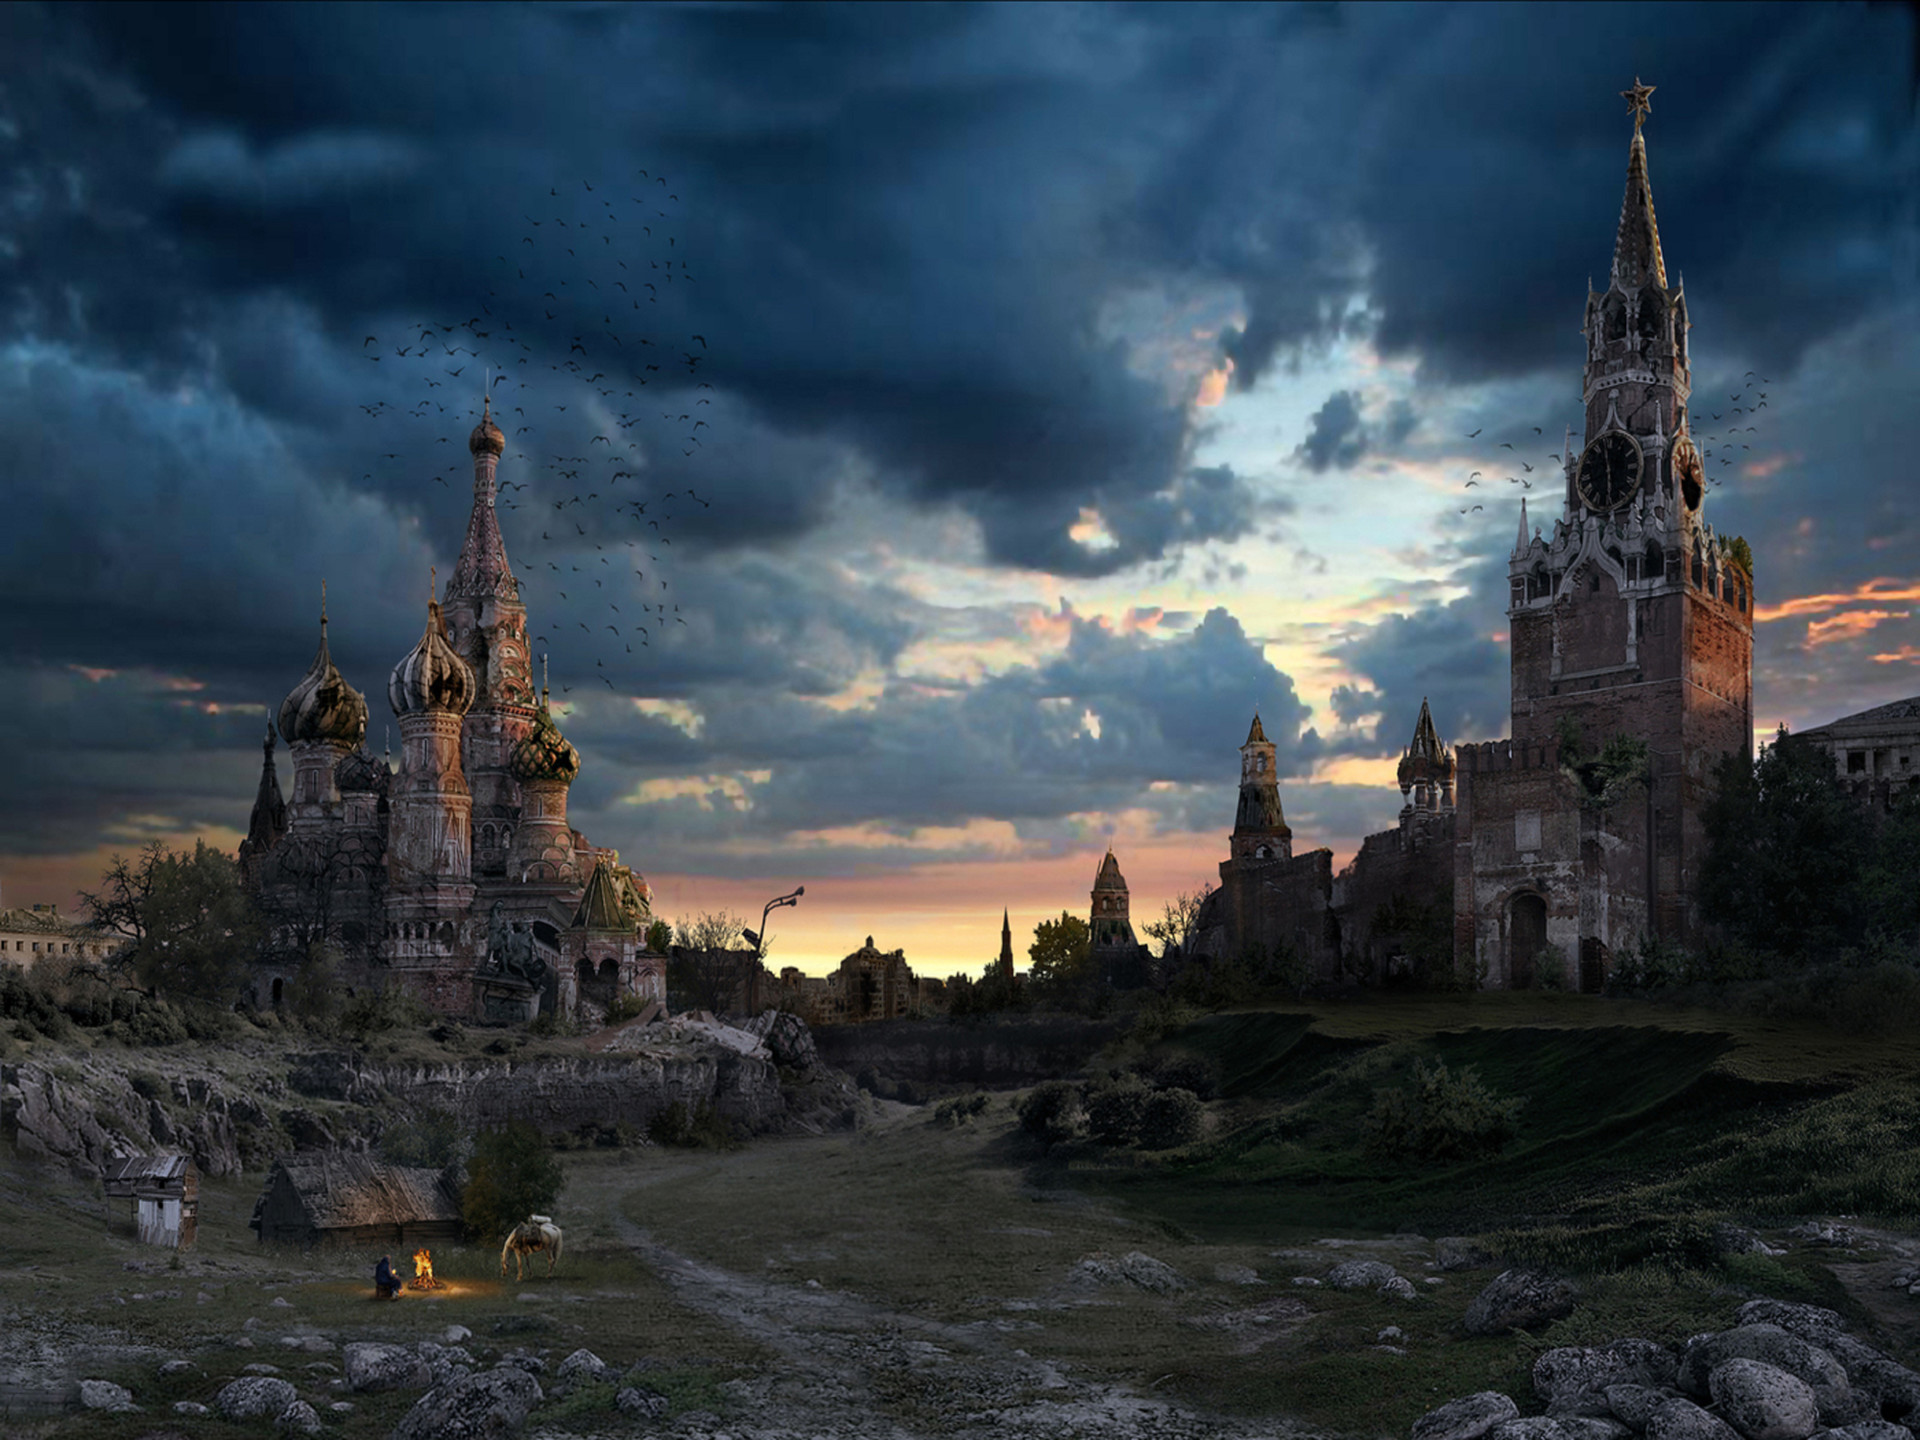 1920x1440 Sci Fi - Post Apocalyptic Church Building Sci Fi Moscow Russia Wallpaper